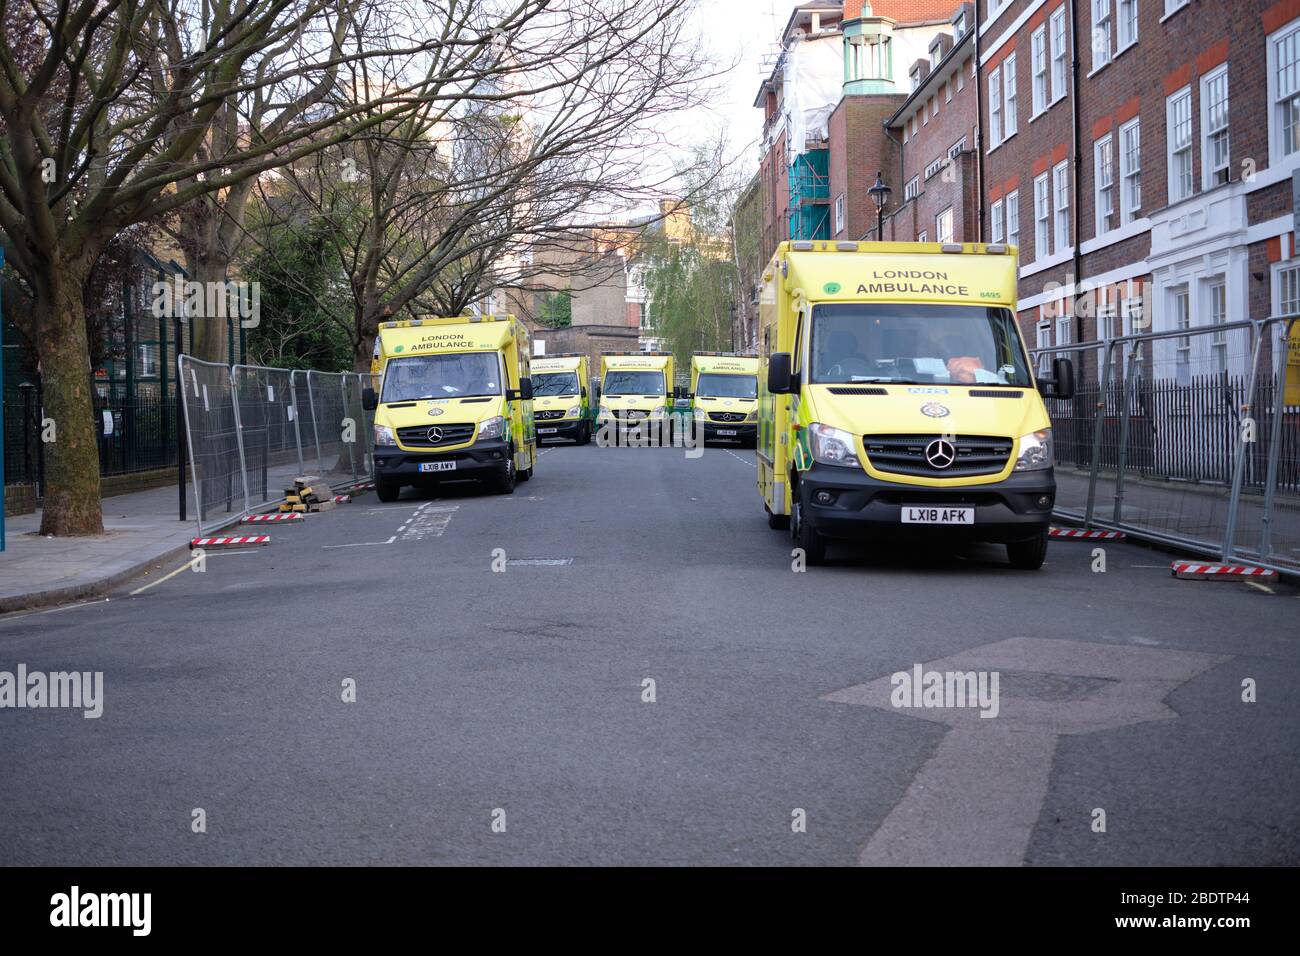 London, UK - 09 April 2020: Front view of temporary Ambulance park in Causton Street, Westminster London outside Westminster Ambulance Station Stock Photo